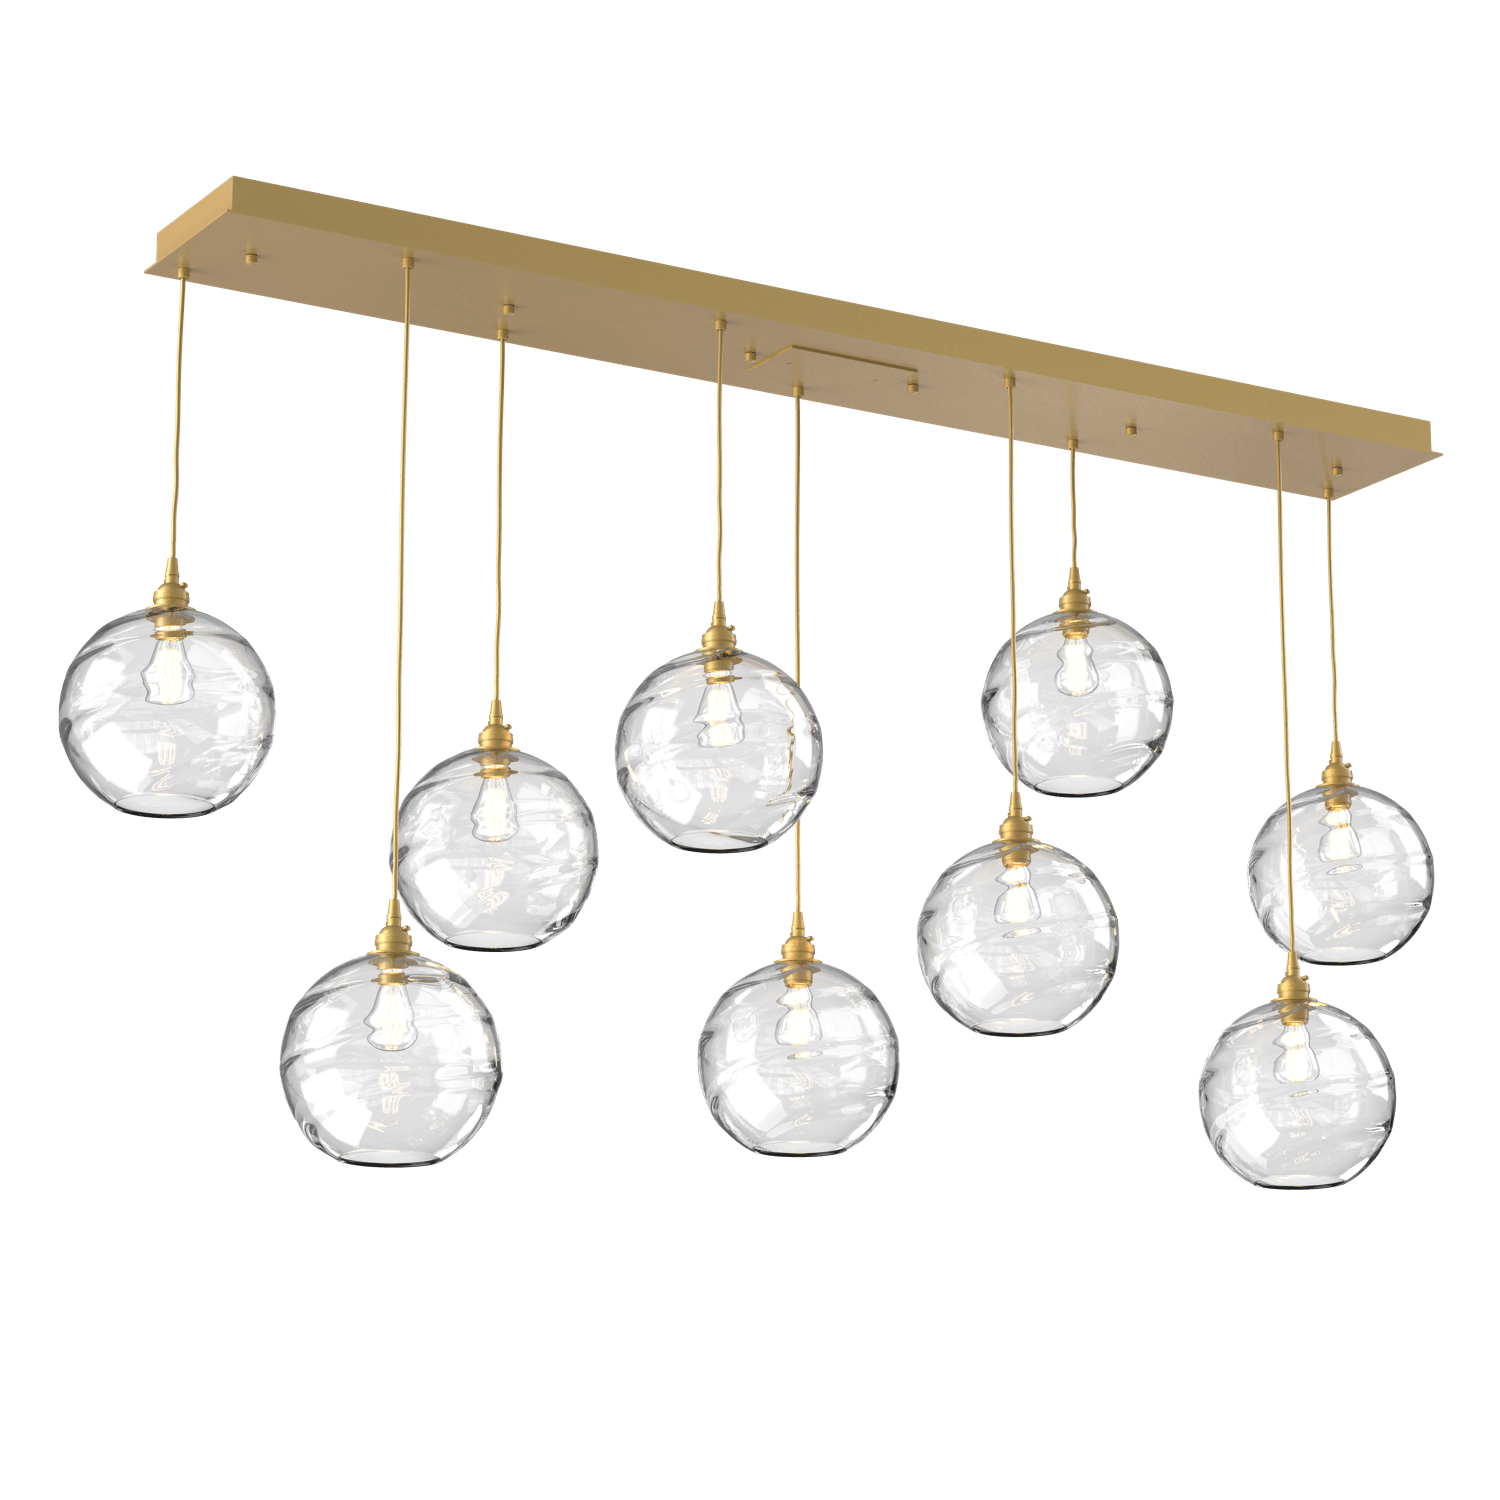 PLB0047-09-GB-OC-Hammerton-Studio-Optic-Blown-Glass-Terra-9-light-linear-pendant-chandelier-with-gilded-brass-finish-and-optic-clear-blown-glass-shades-and-incandescent-lamping